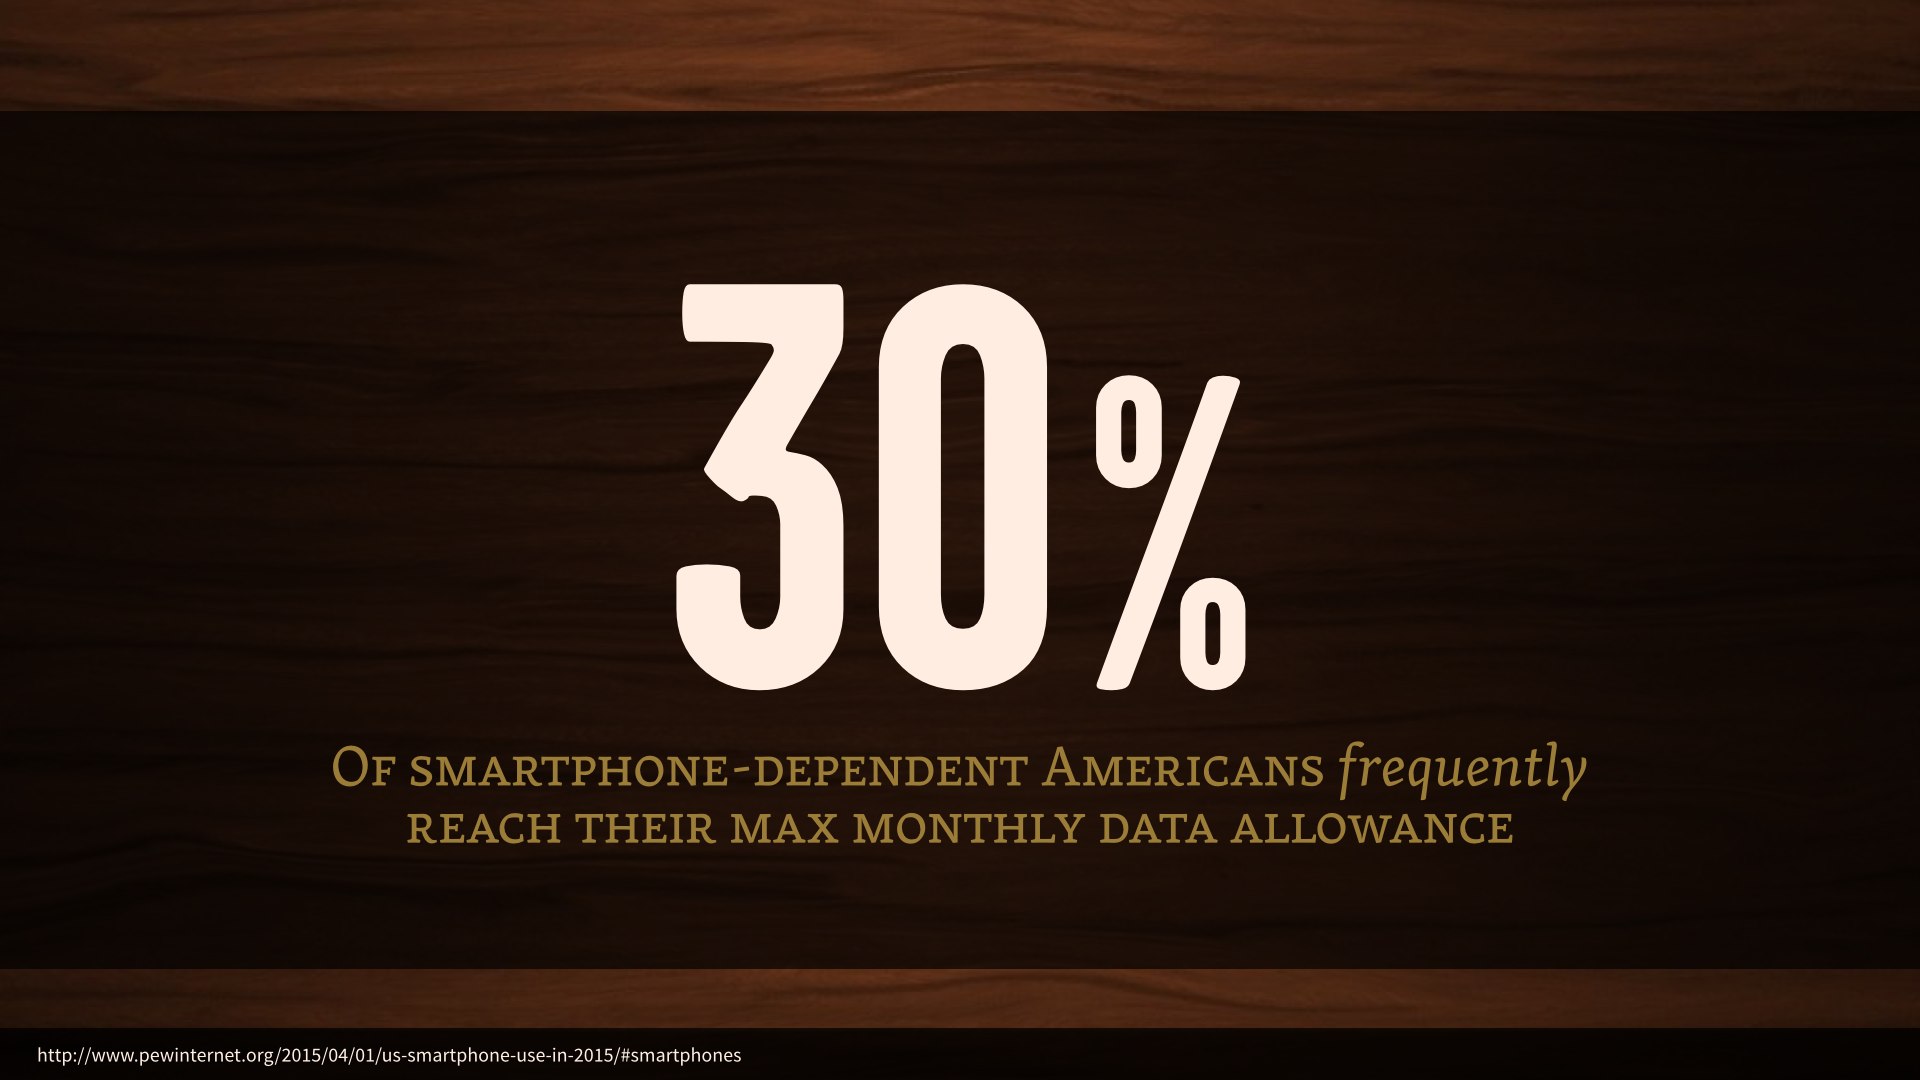 30% of smartphone-dependent Americans frequently reach their max monthly data allowance